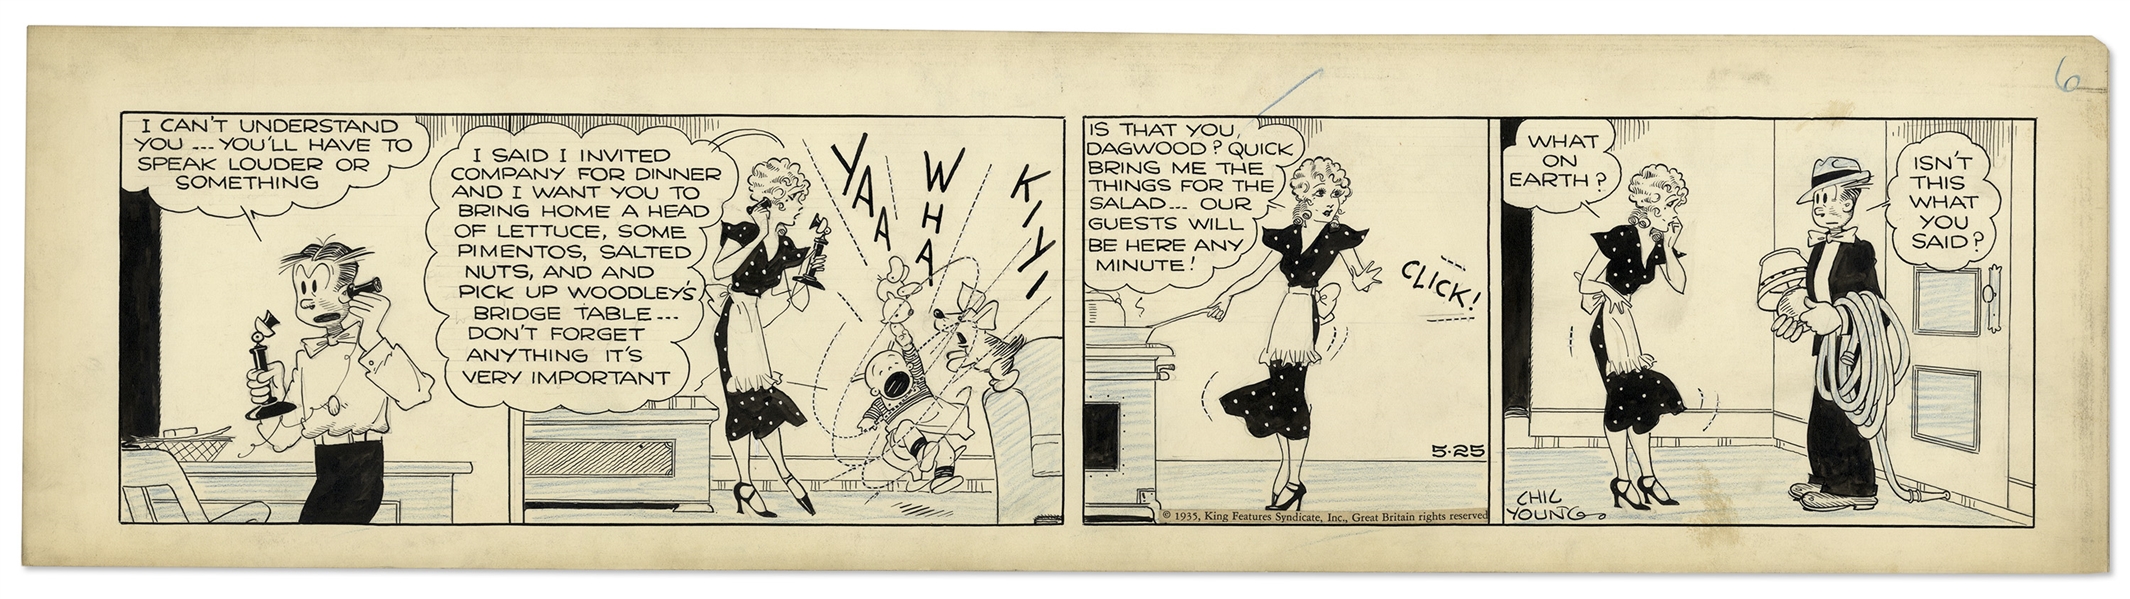 Chic Young Hand-Drawn ''Blondie'' Comic Strip From 1935 Titled ''That's The Way it Sounded''